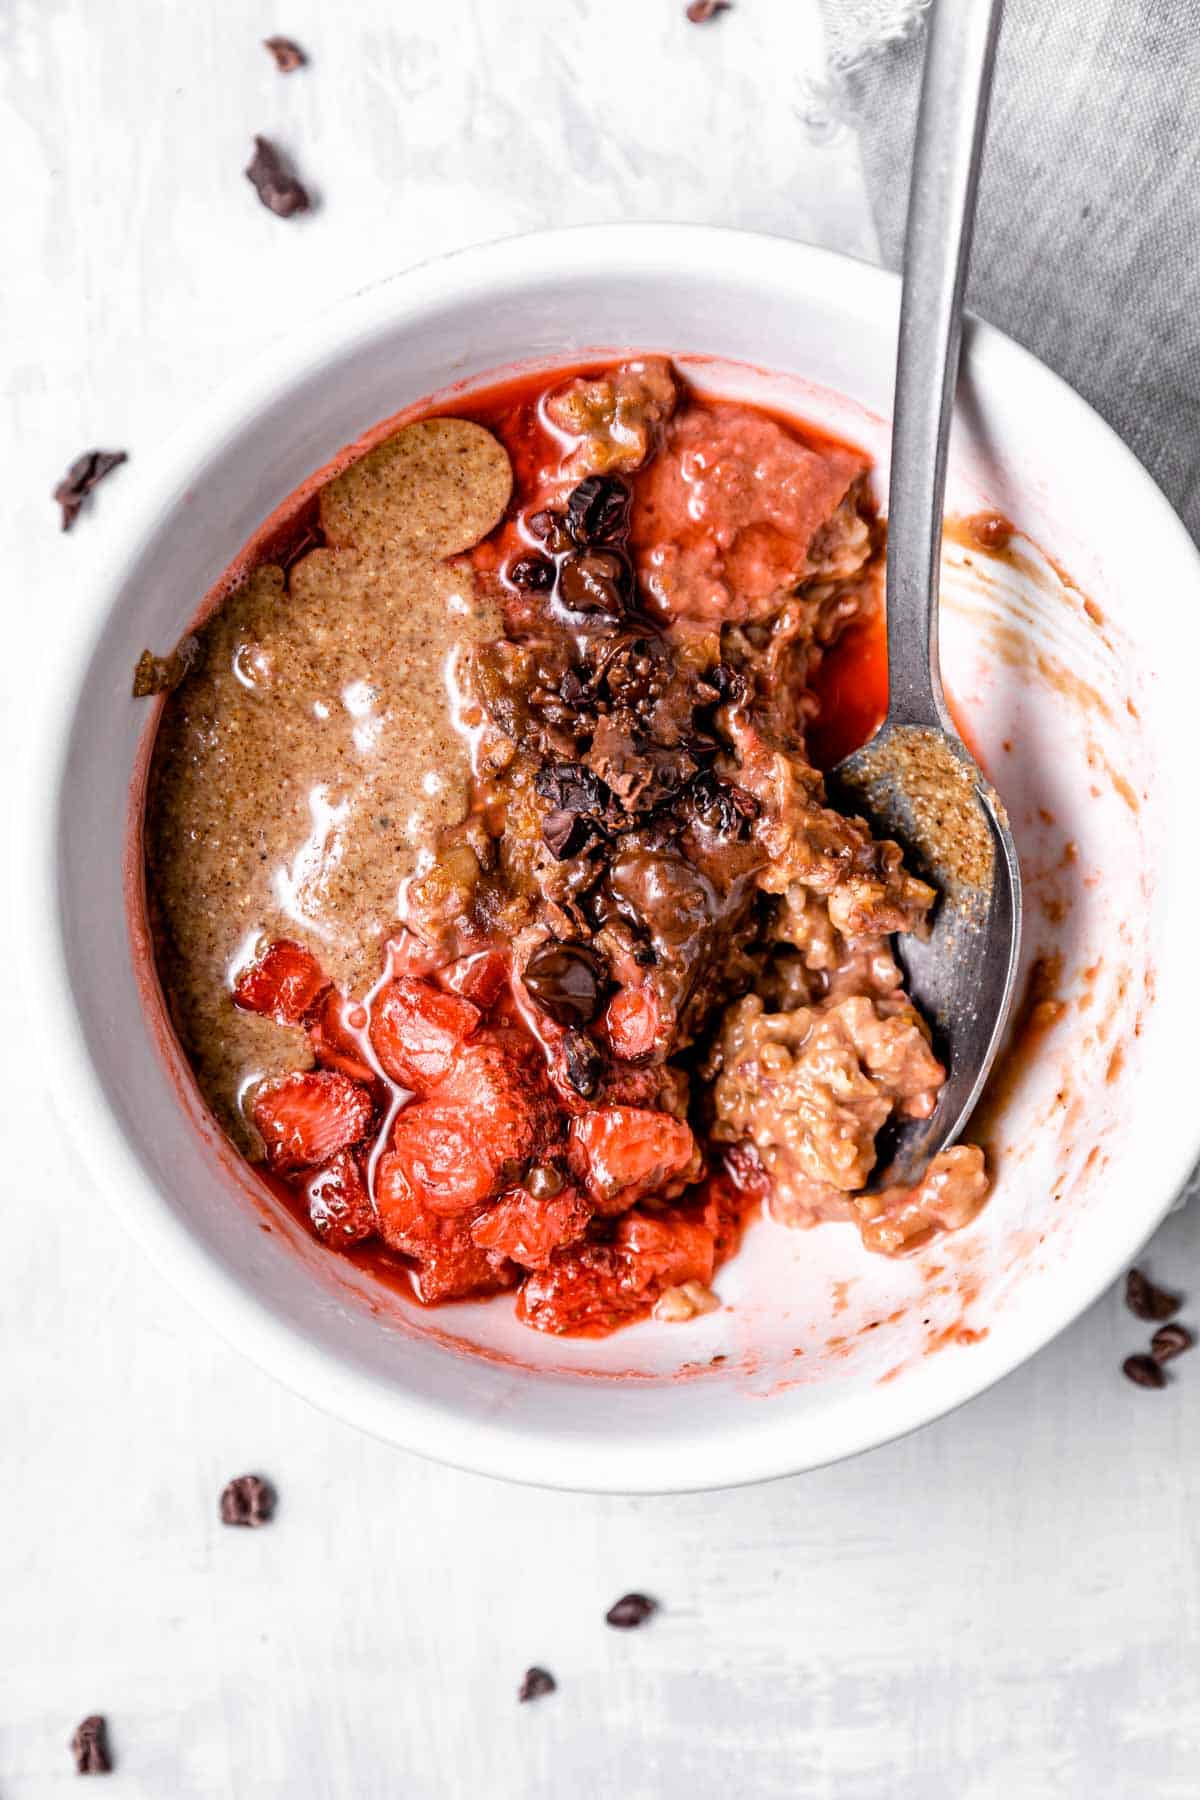 An oatmeal bowl with nut butter, strawberry sauce, and chocolate chips.